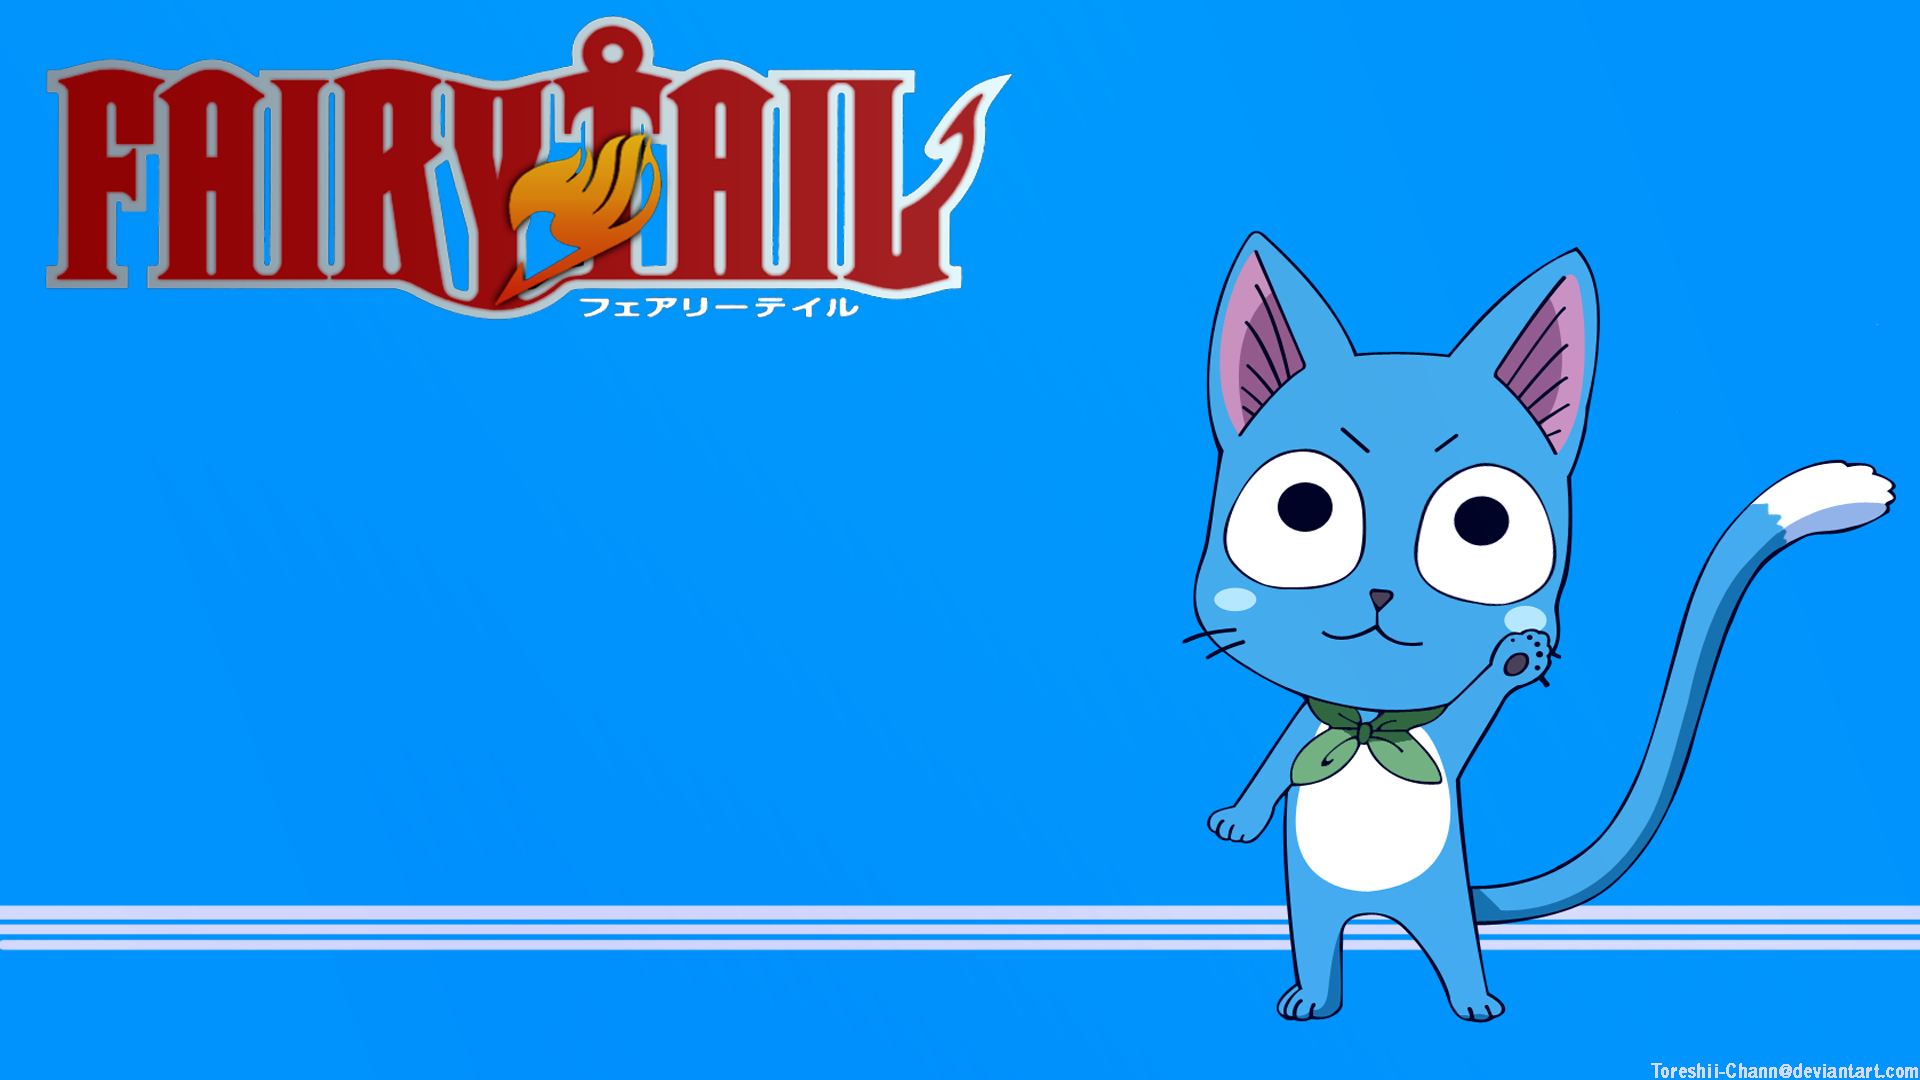 Happy Fairy Tail Wallpapers